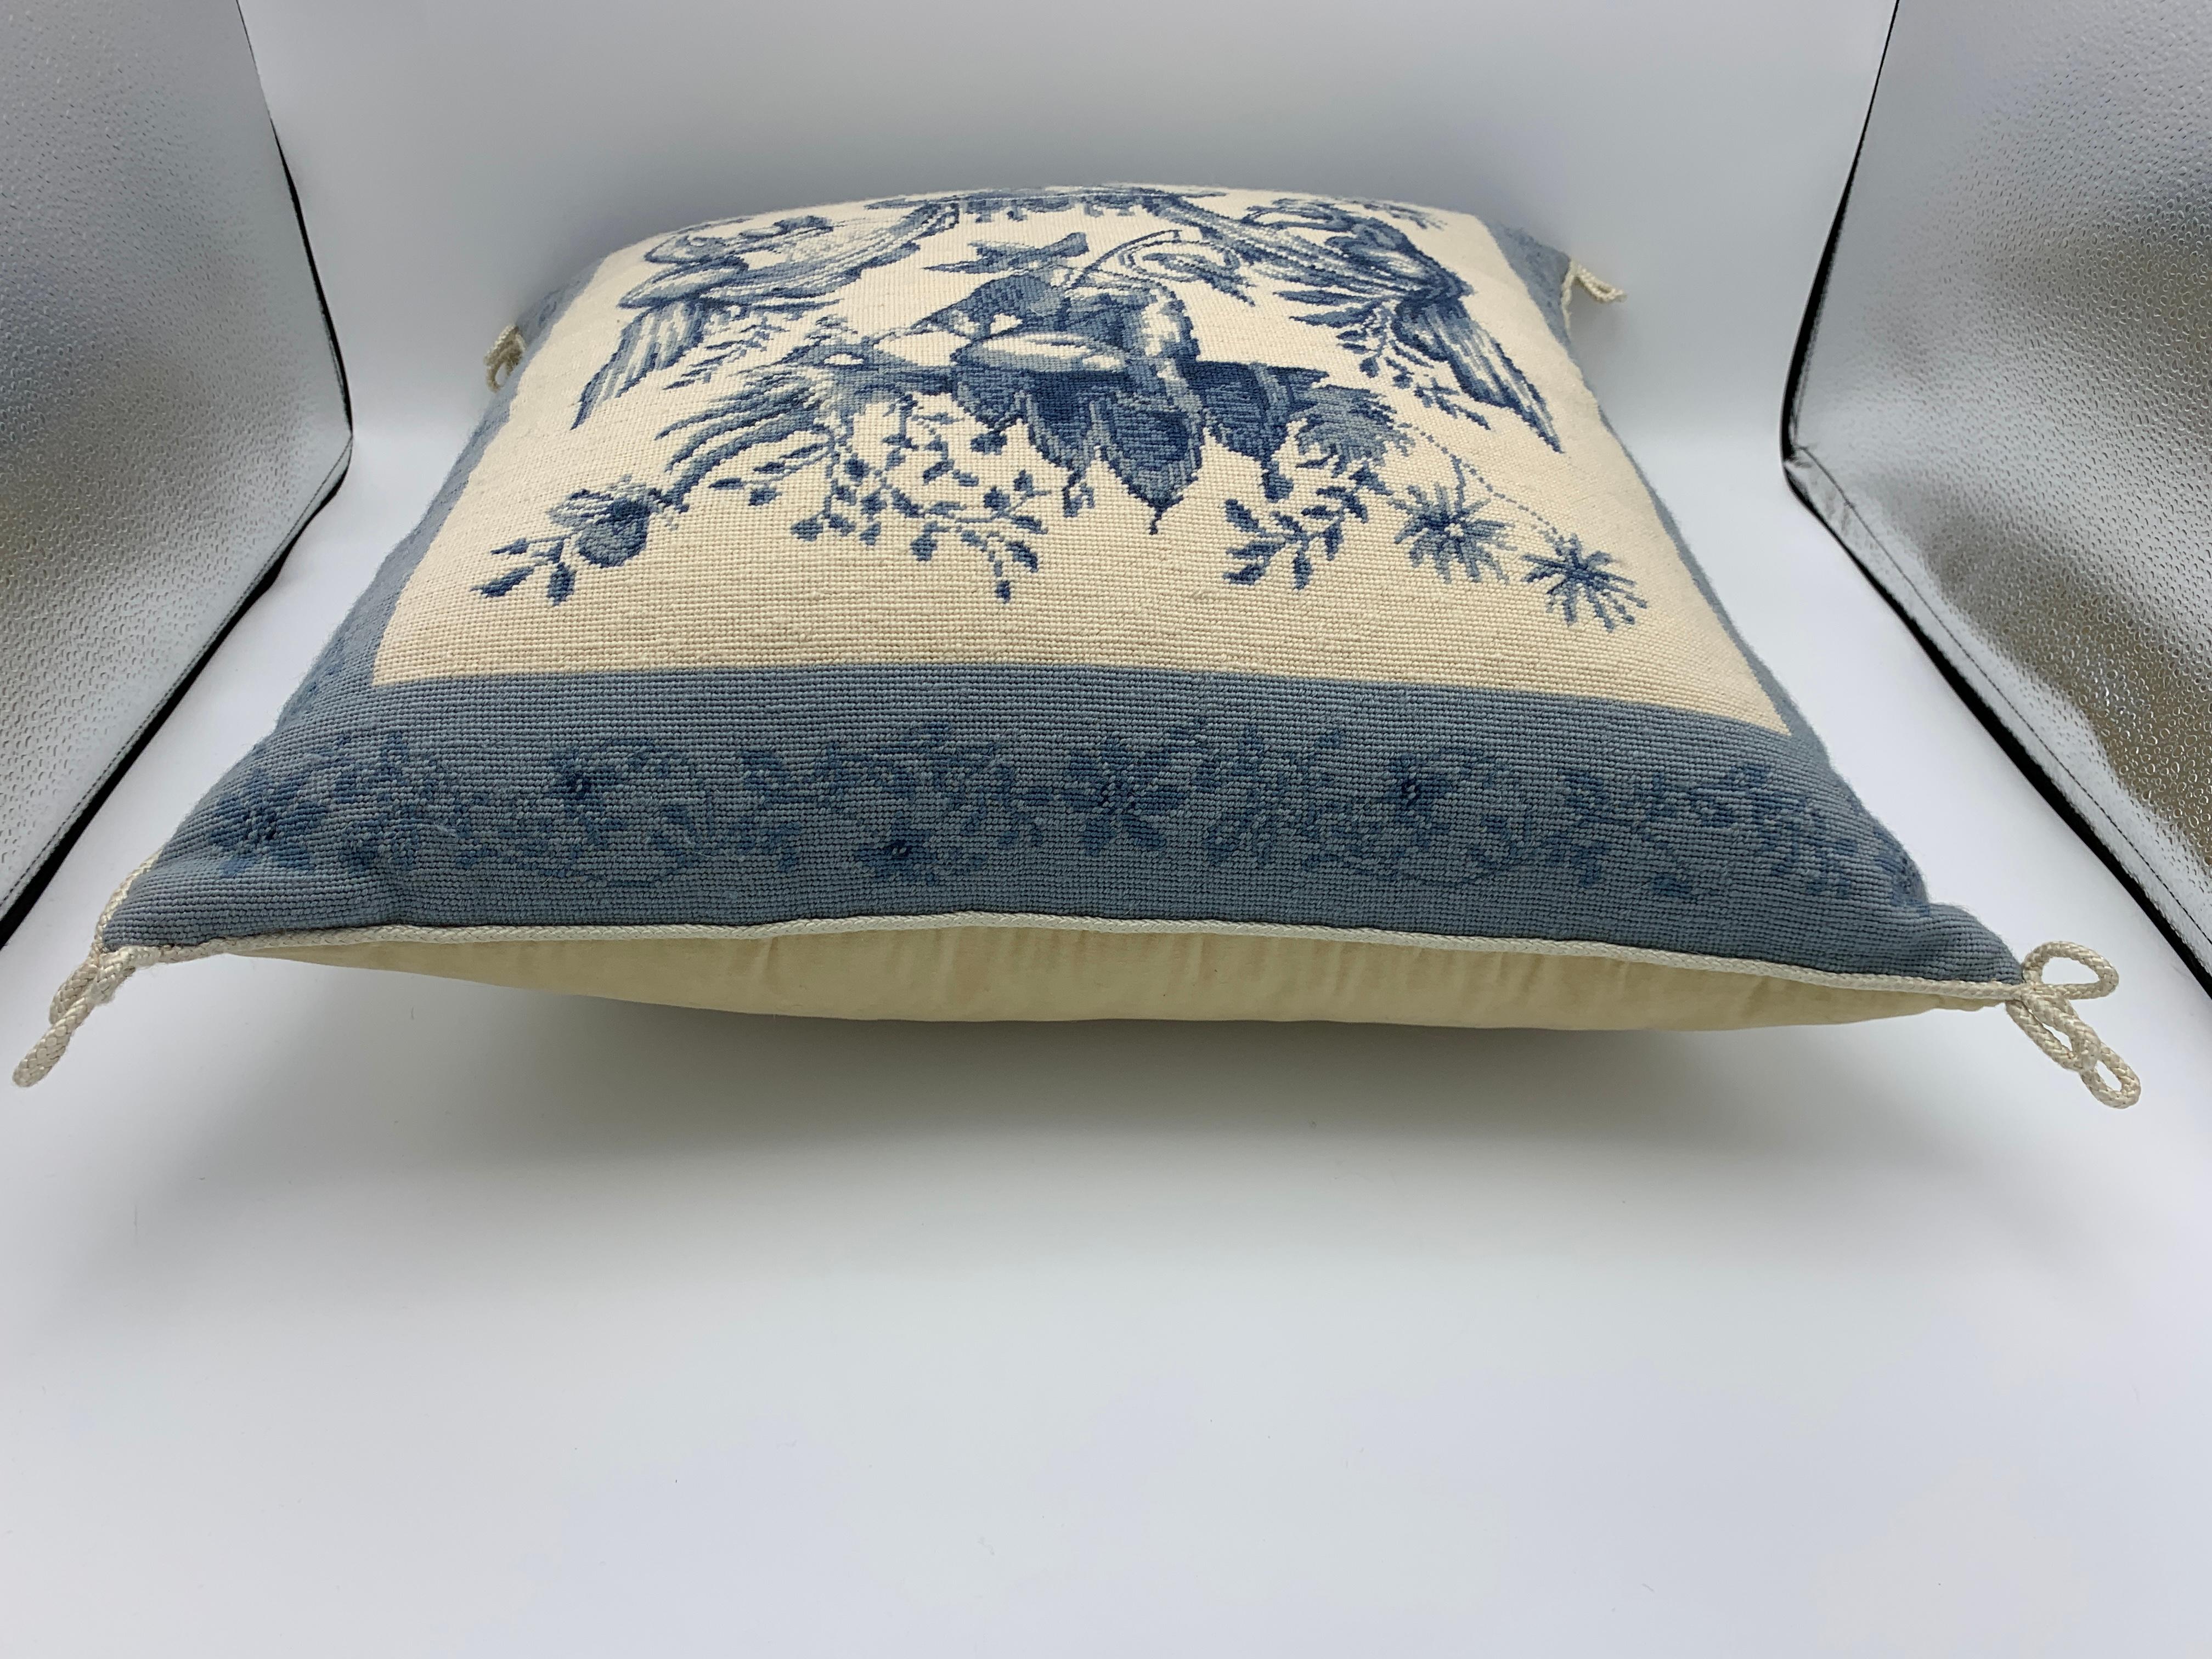 Chinoiserie Blue and White Pagoda Needlepoint Pillow, 1970s For Sale 7